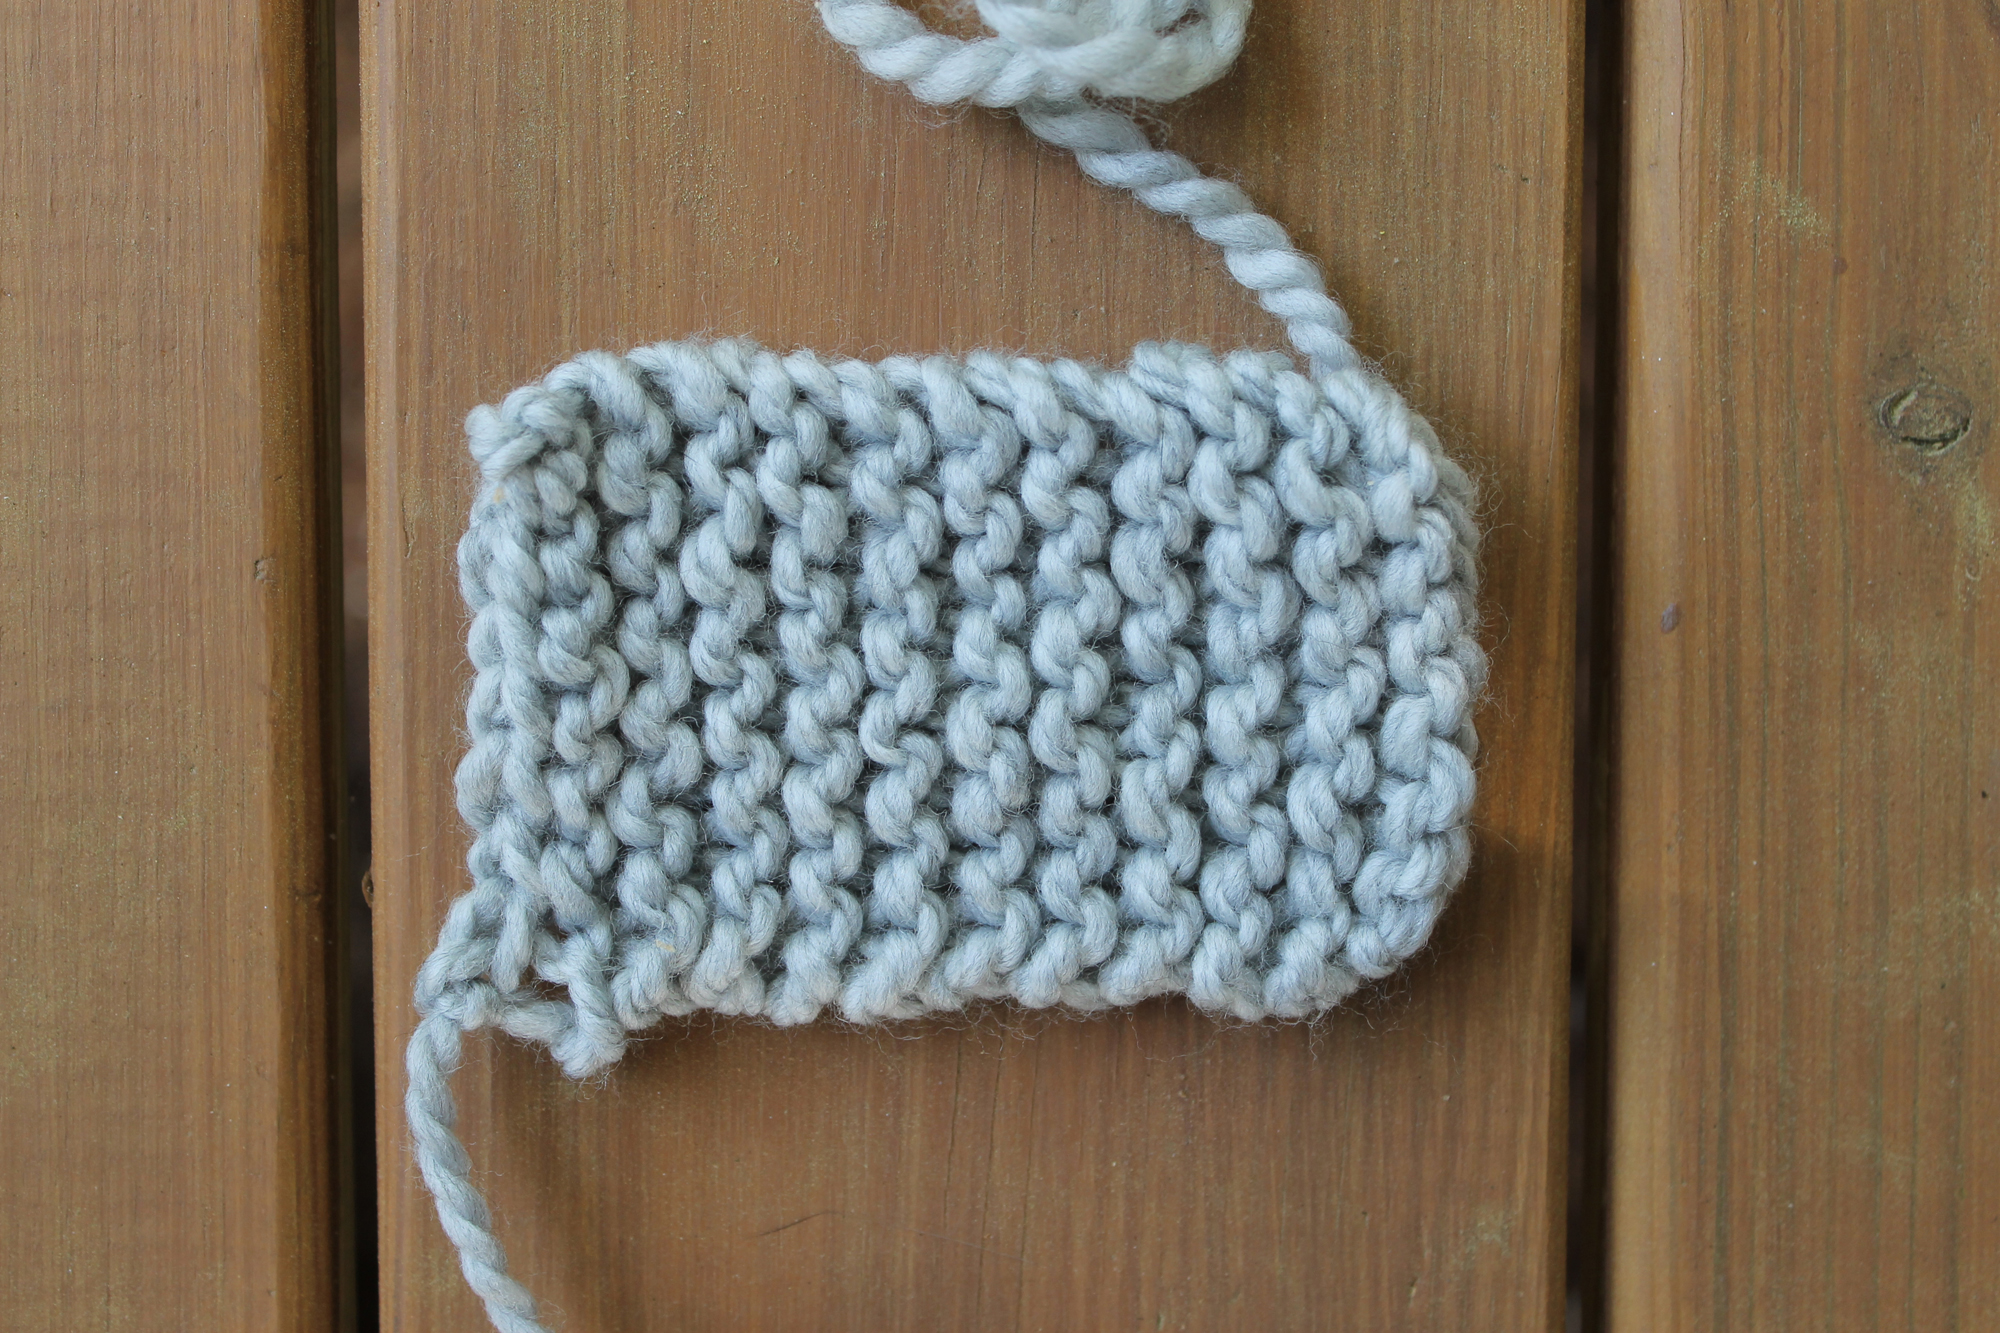 Knitting a rectangle for a bow